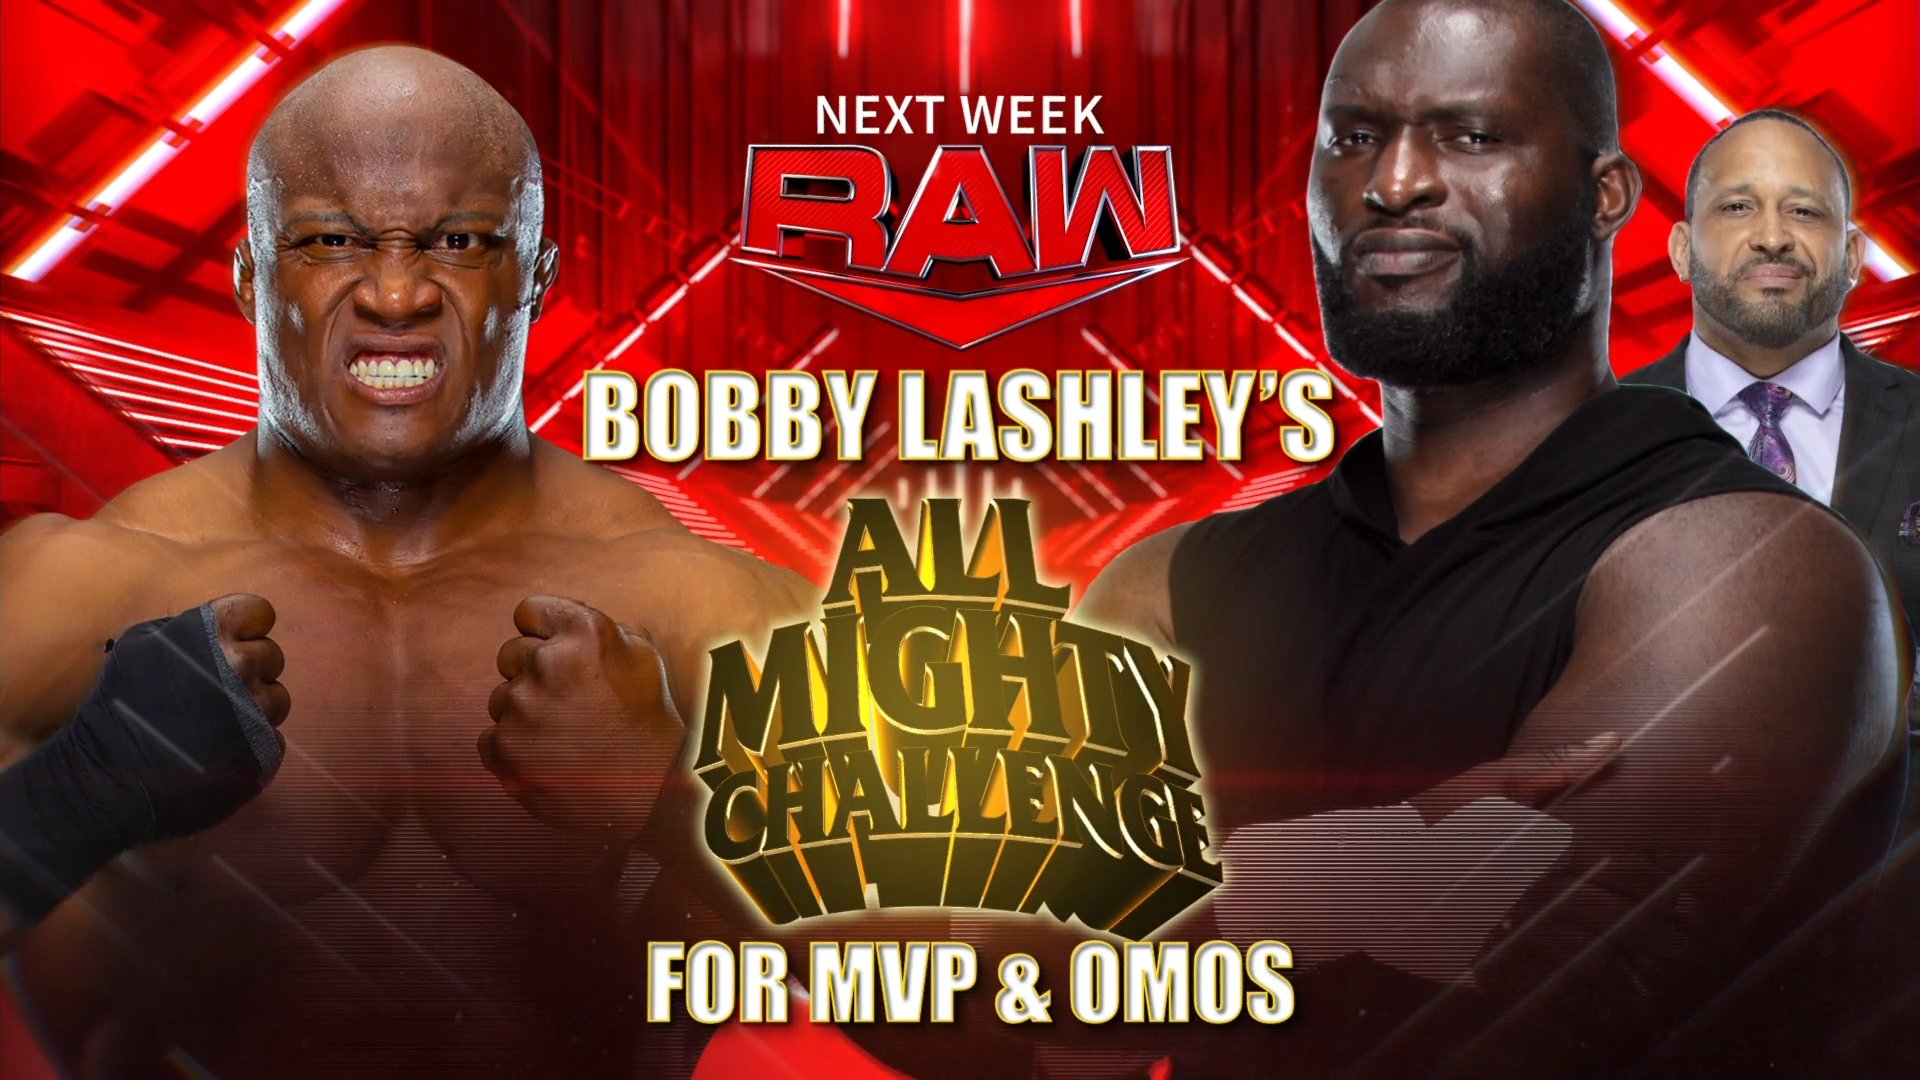 WWE Raw Next Week: Omos and MVP to face Bobby Lashley’s All Mighty Challenge